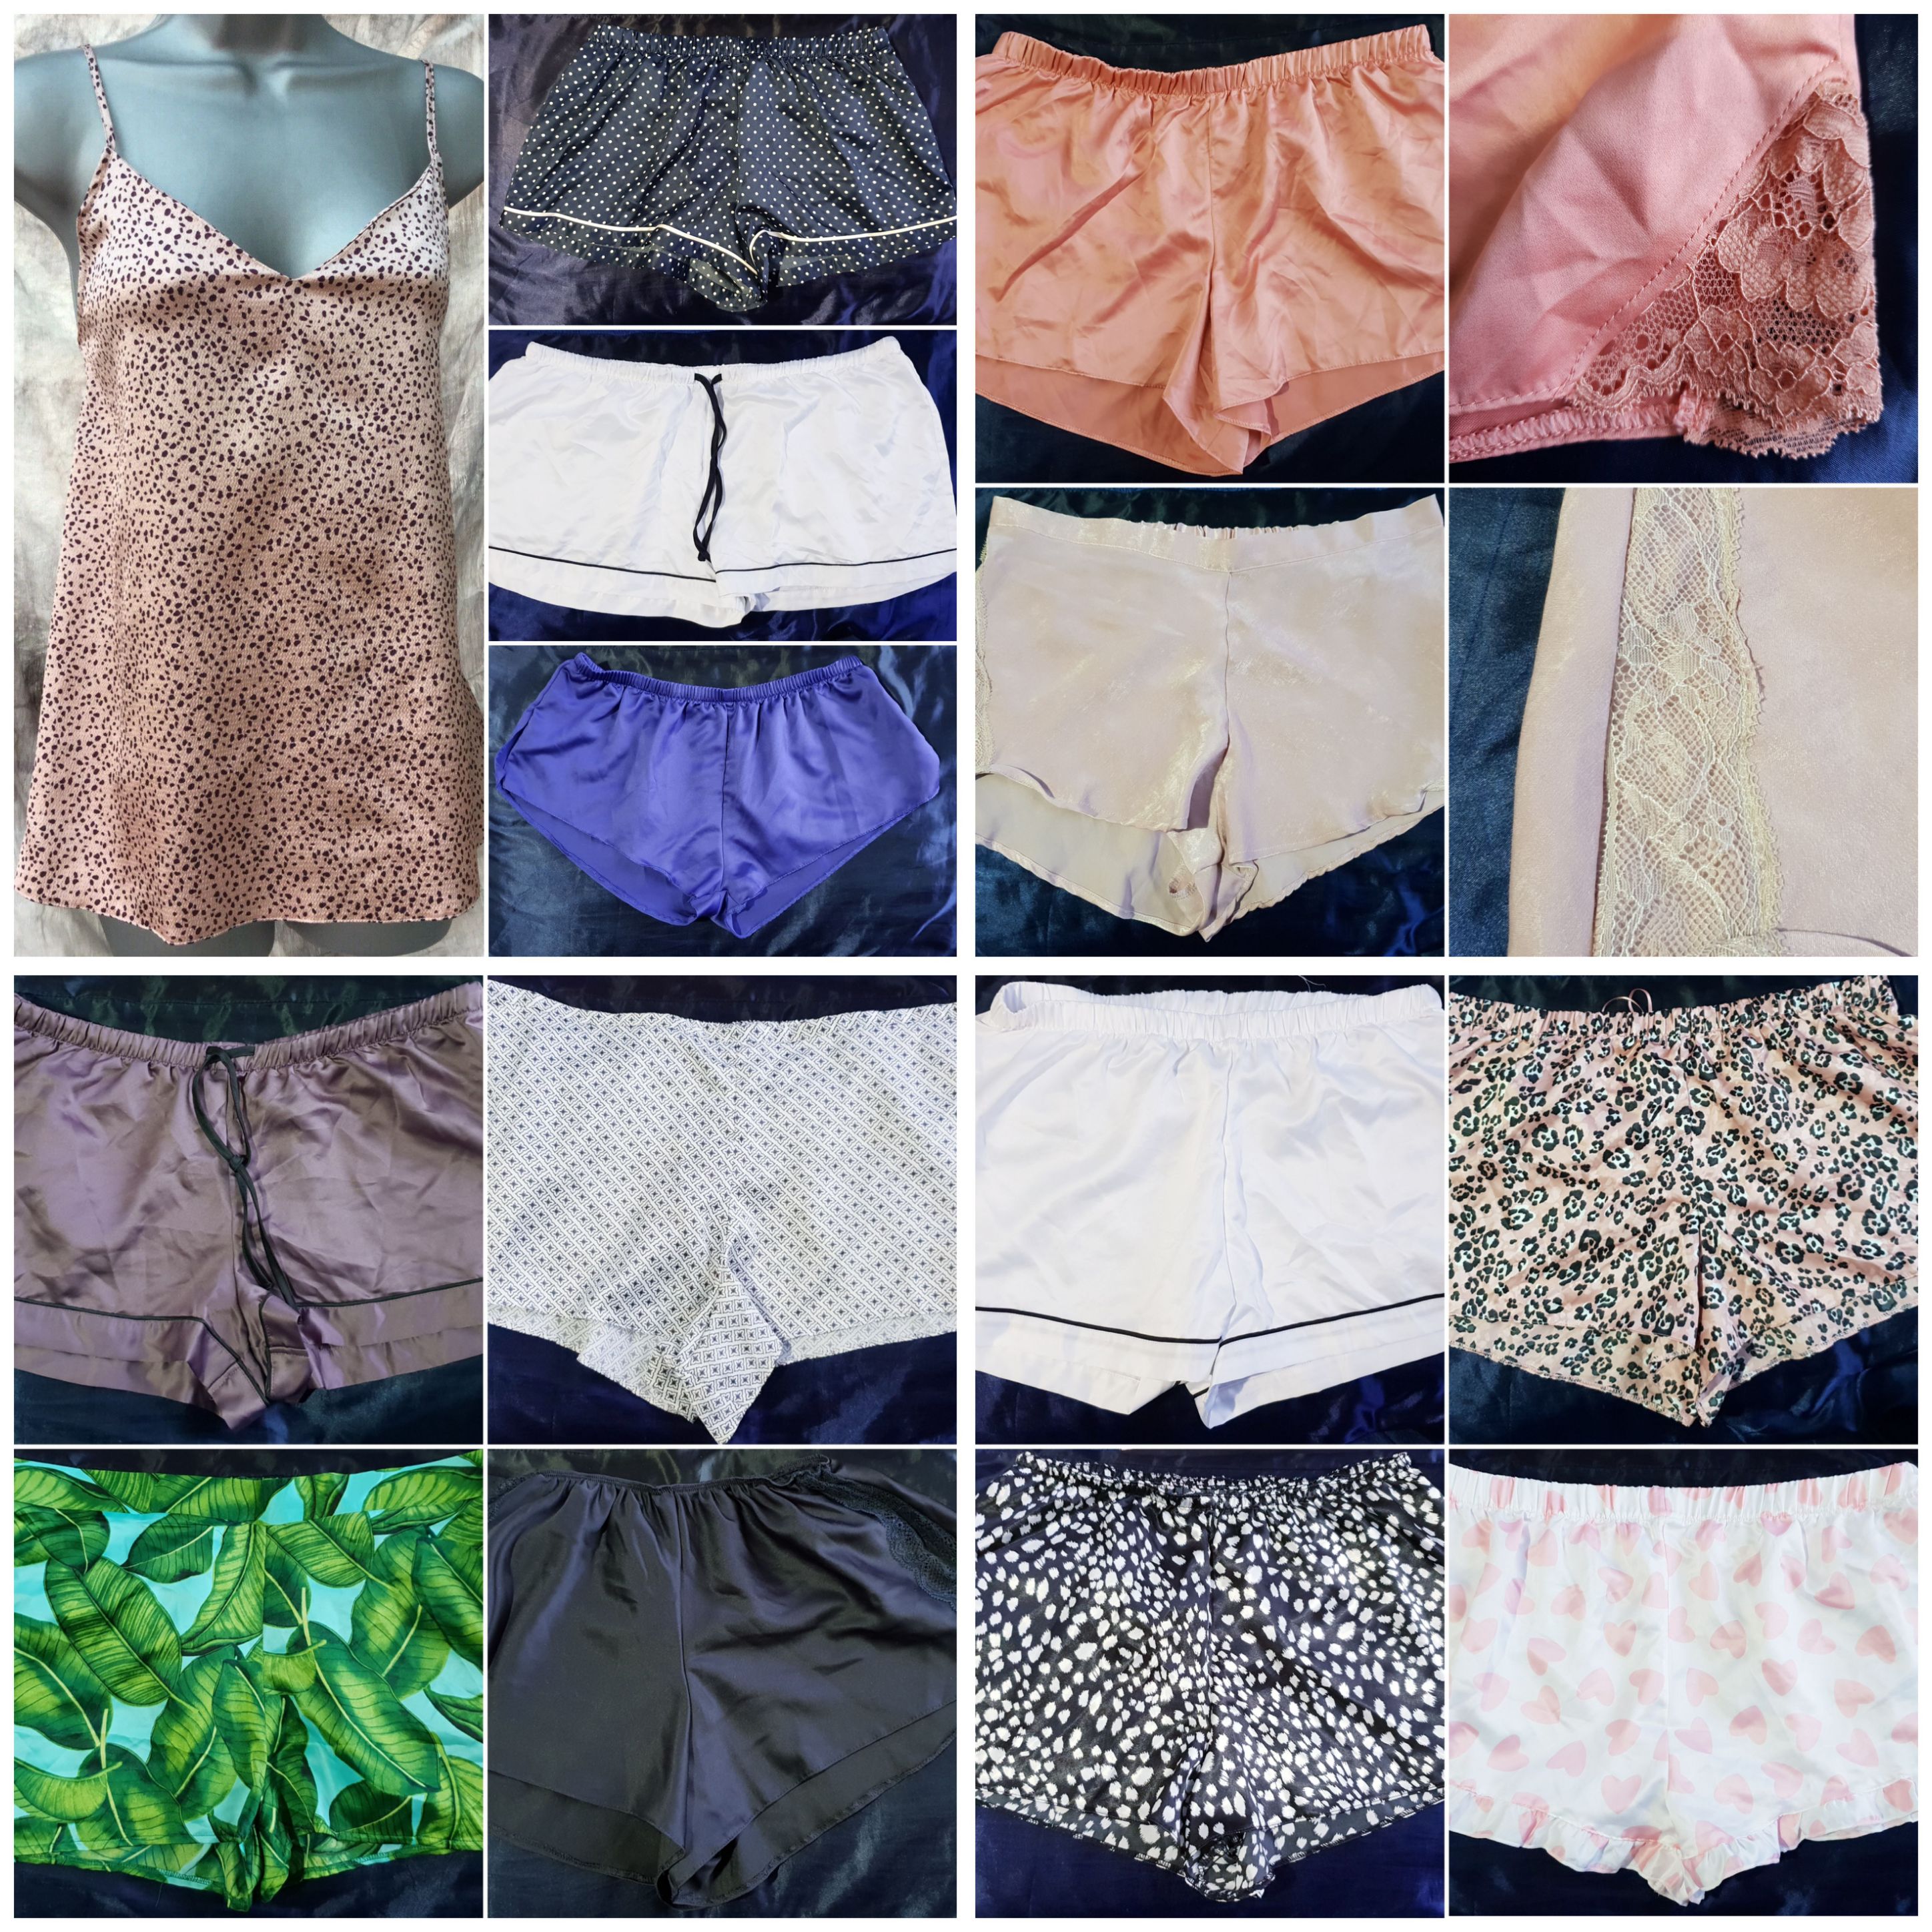 76 Pairs of Cami Shorts & 3 cami tops Ex-Department Store Sizes 8-20